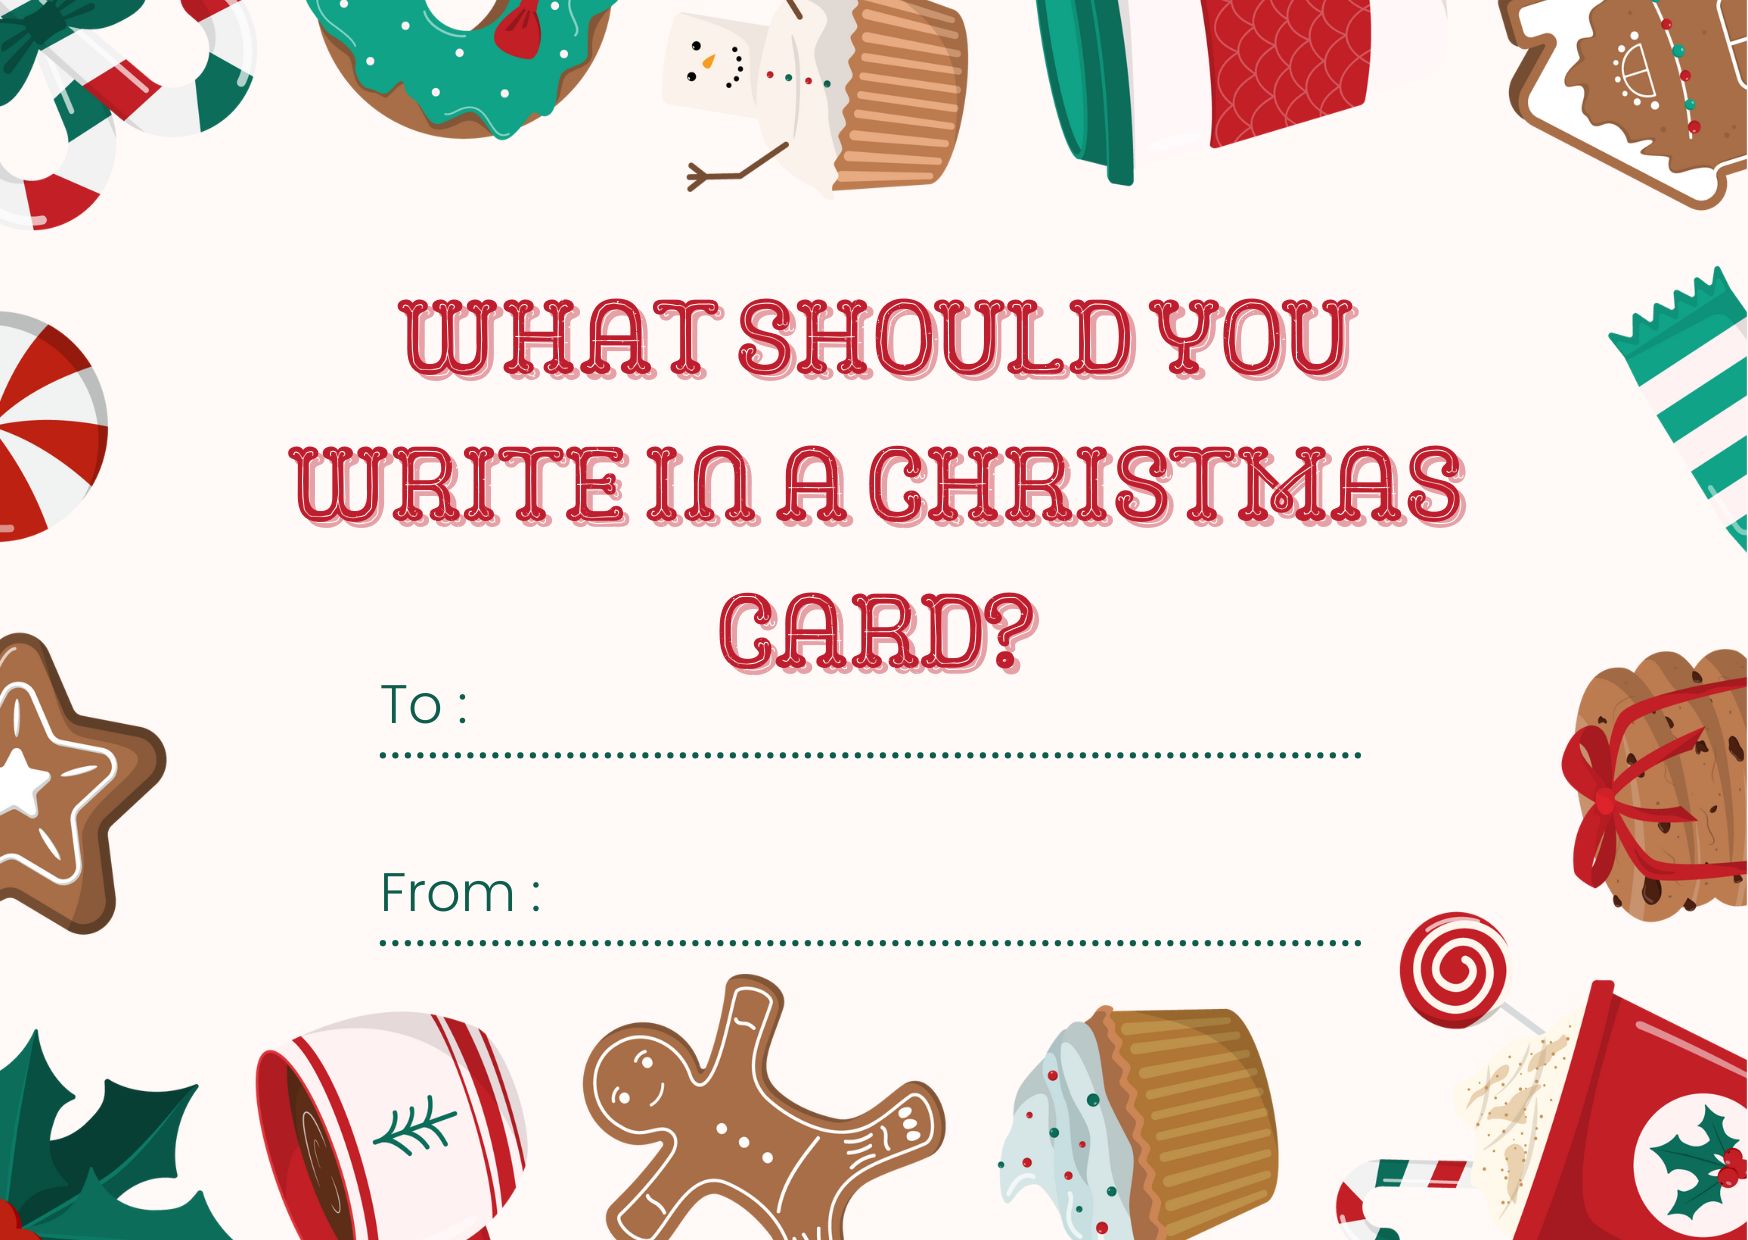 What Should You Write in a Christmas Card?